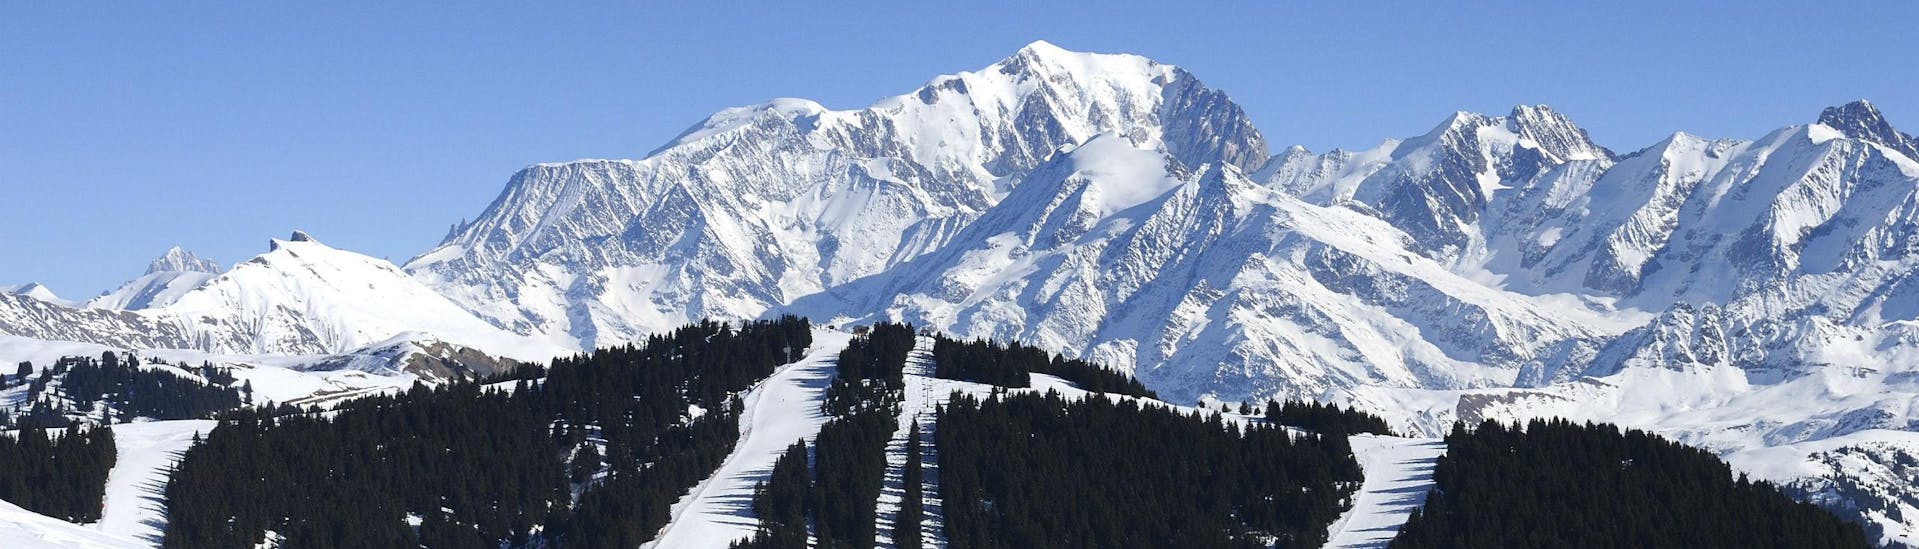 A picturesque view of ski slopes of Les Saisies, a French ski resort nestled between the majestic peaks of the Savoy department, where local ski schools offer a broad range of ski lessons for anyone who wishes to learn to ski.